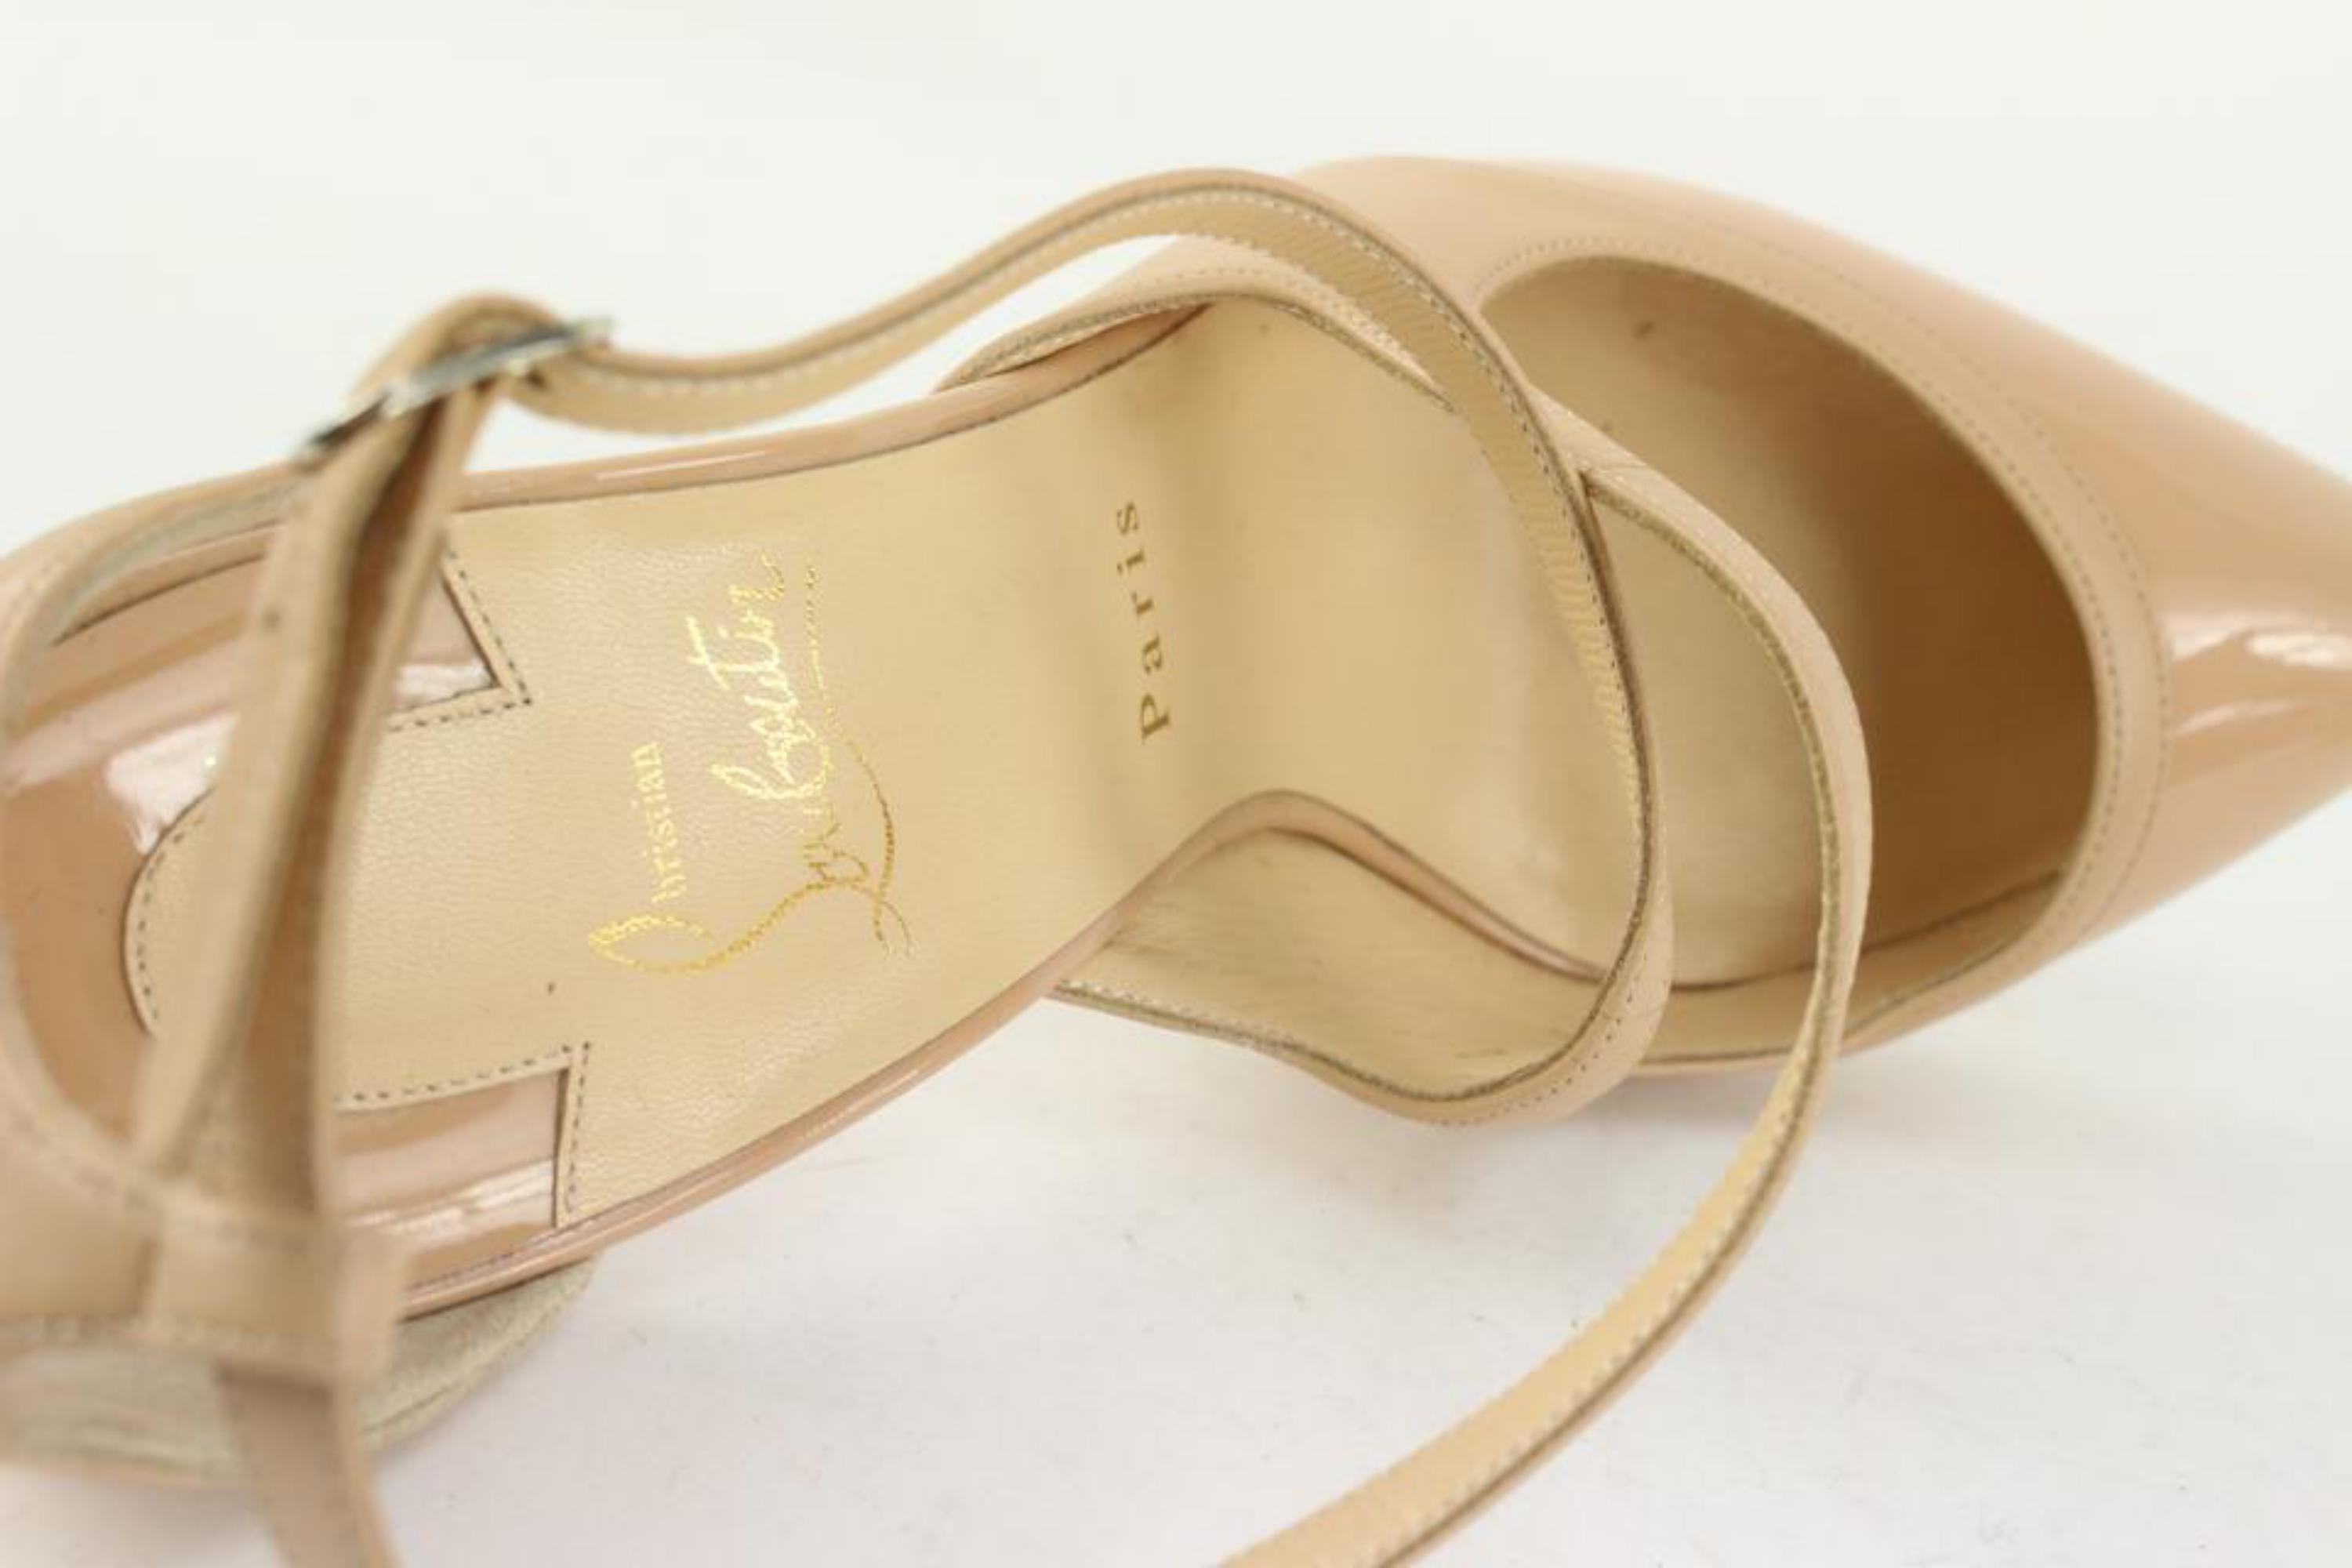 Christian Louboutin Women's 41 Nude Patent Leather Crosspiga Strappy Heel 1CL1117
Made In: Italy 
Measurements: Length: 9 